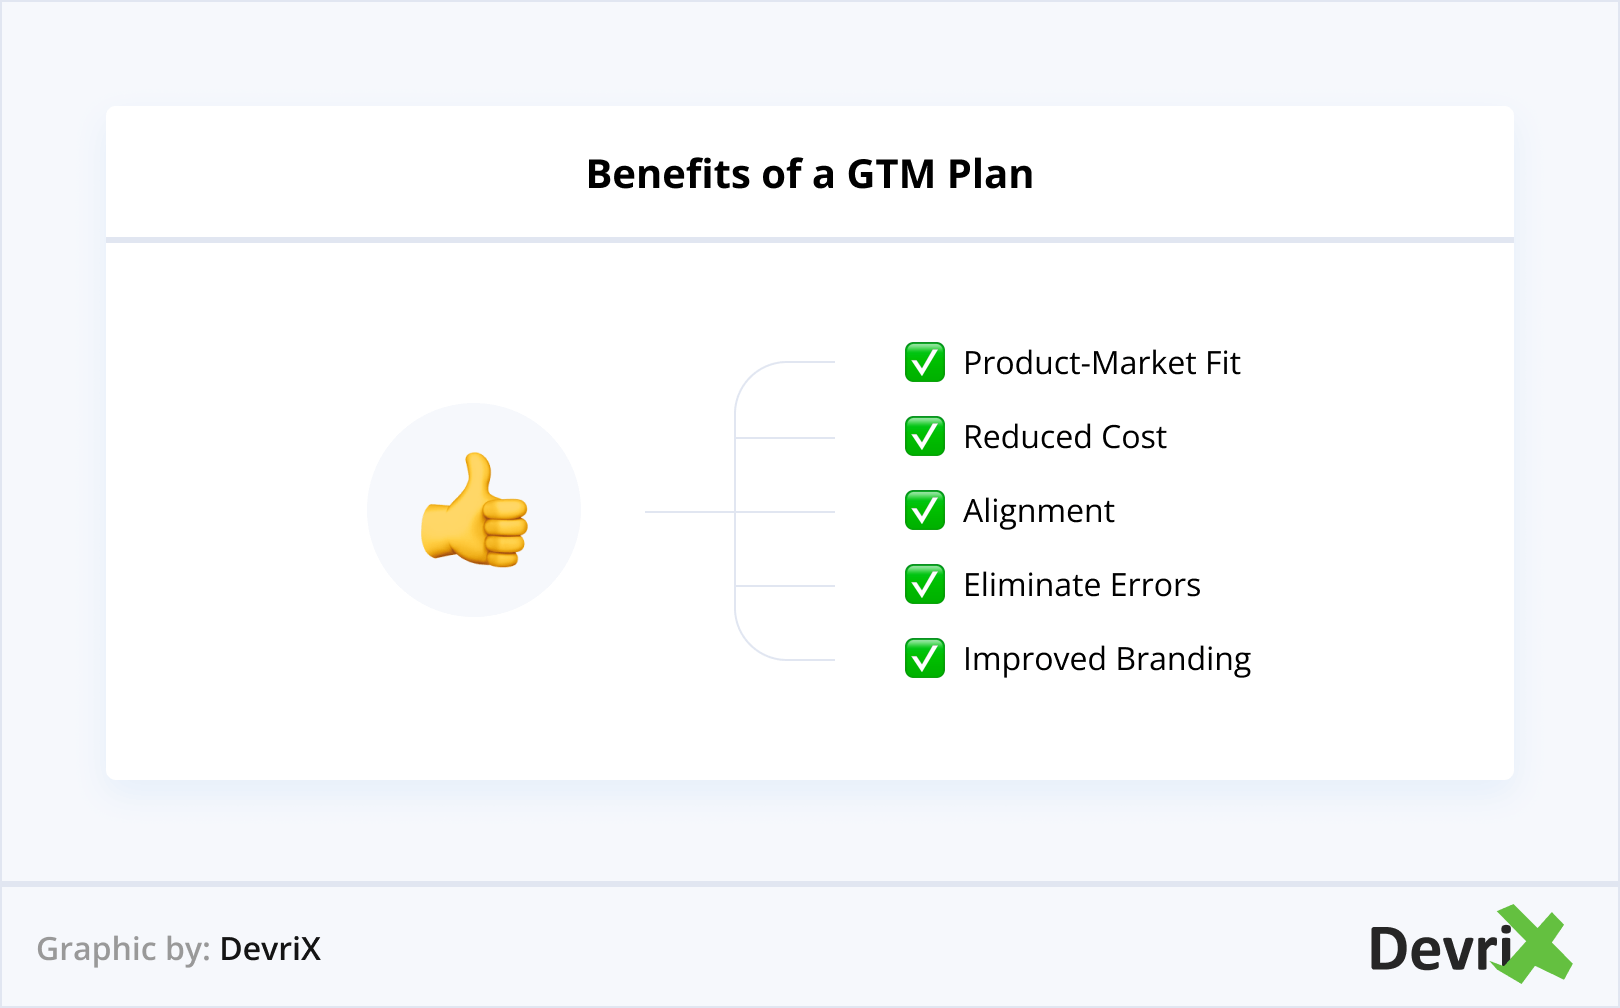 Benefits of a GTM Plan